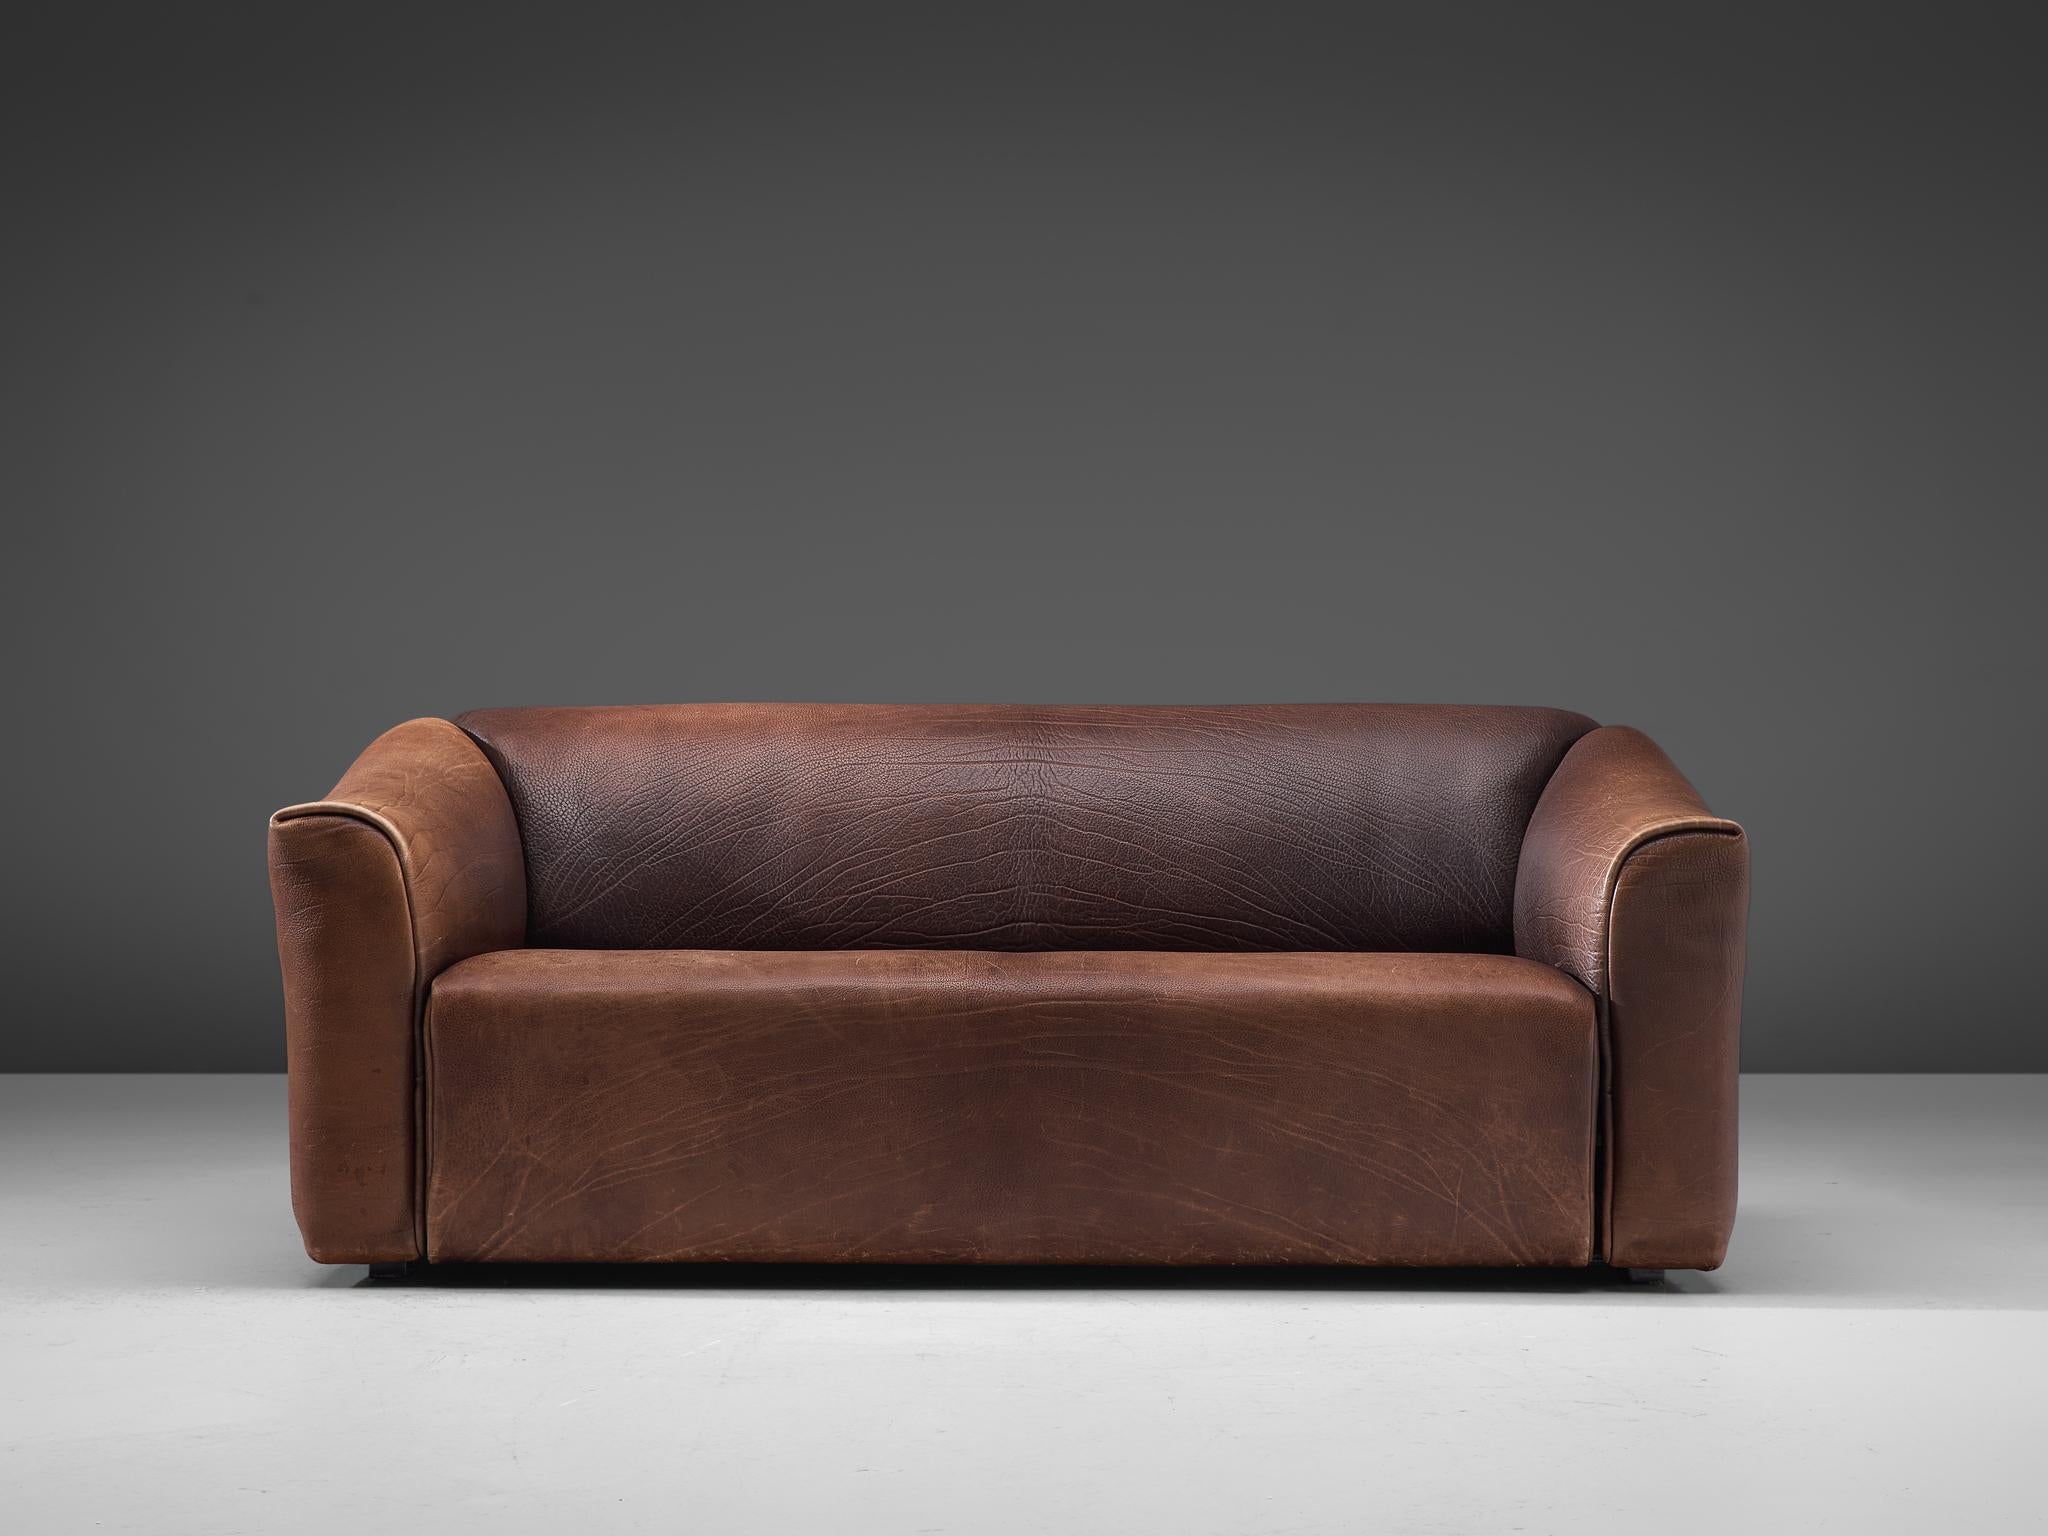 De Sede, DS-47 two-seat sofa, buffalo leather, Switzerland, 1970s.

Highly comfortable DS47 sofa in chocolate brown leather by De Sede. The design is simplistic, yet very modern. A tight and cubic outside with a soft and curved inside, which